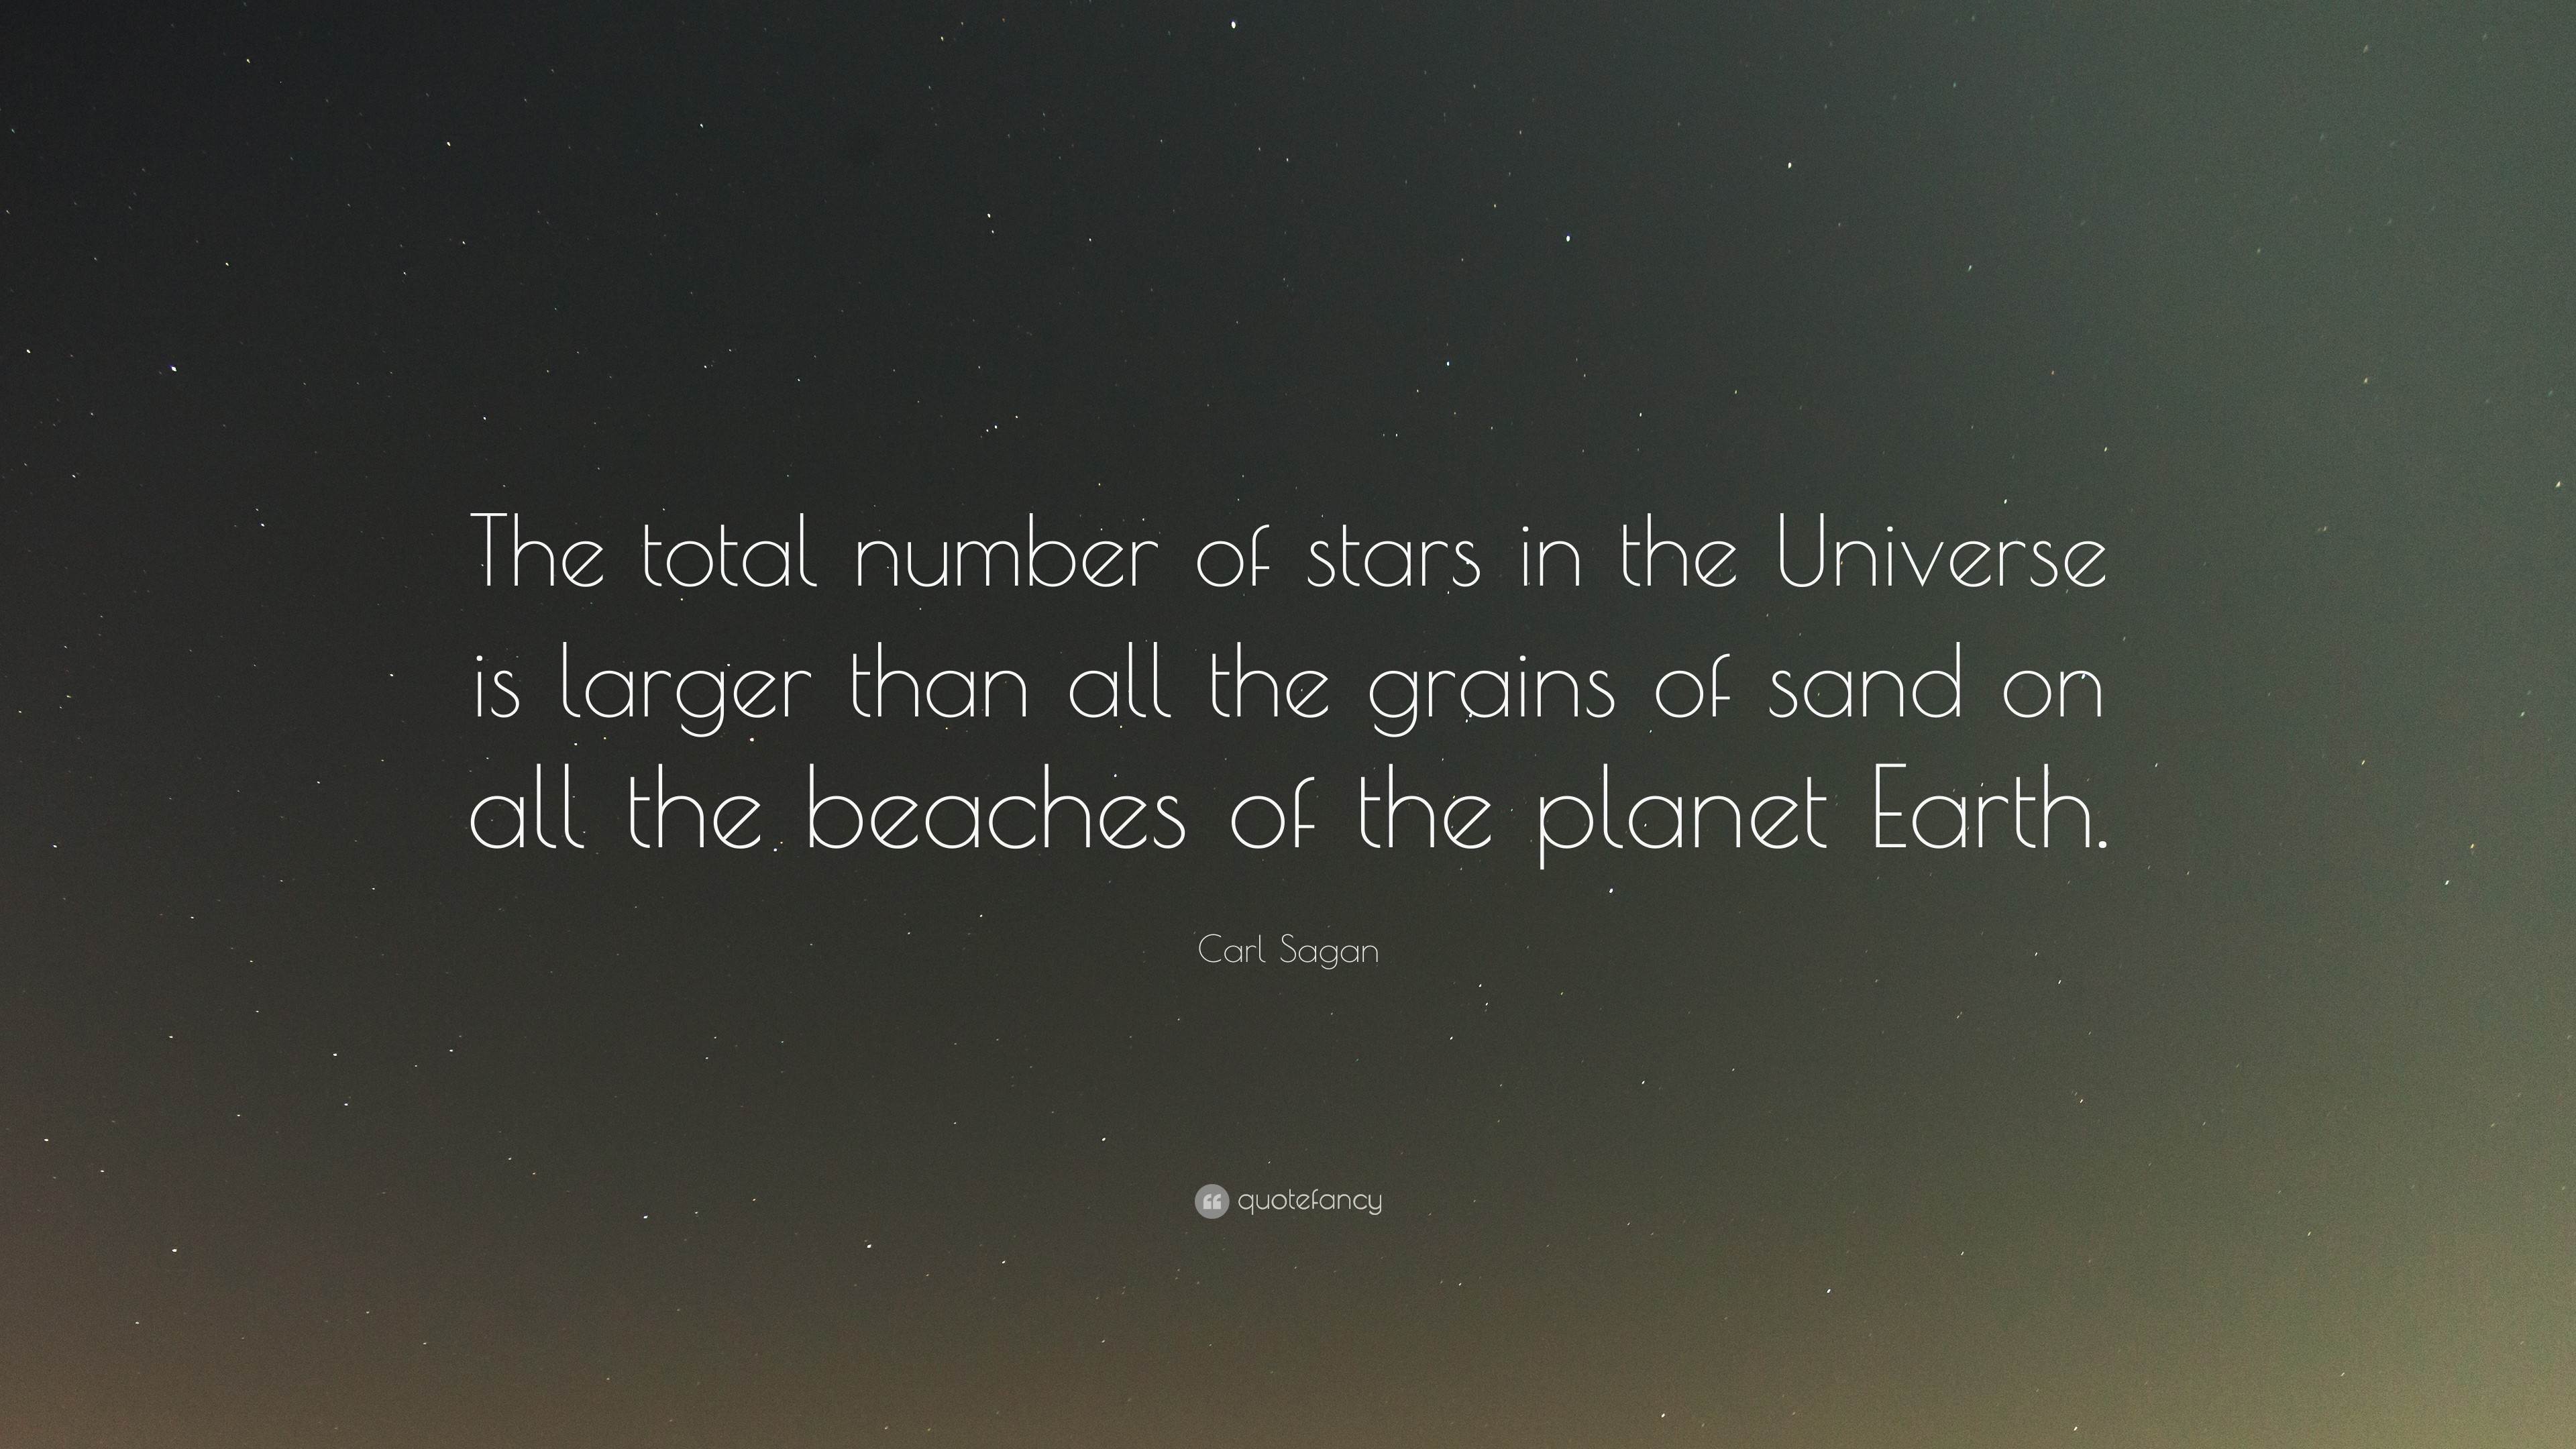 3840x2160 Carl Sagan Quote: “The total number of stars in the Universe is larger than